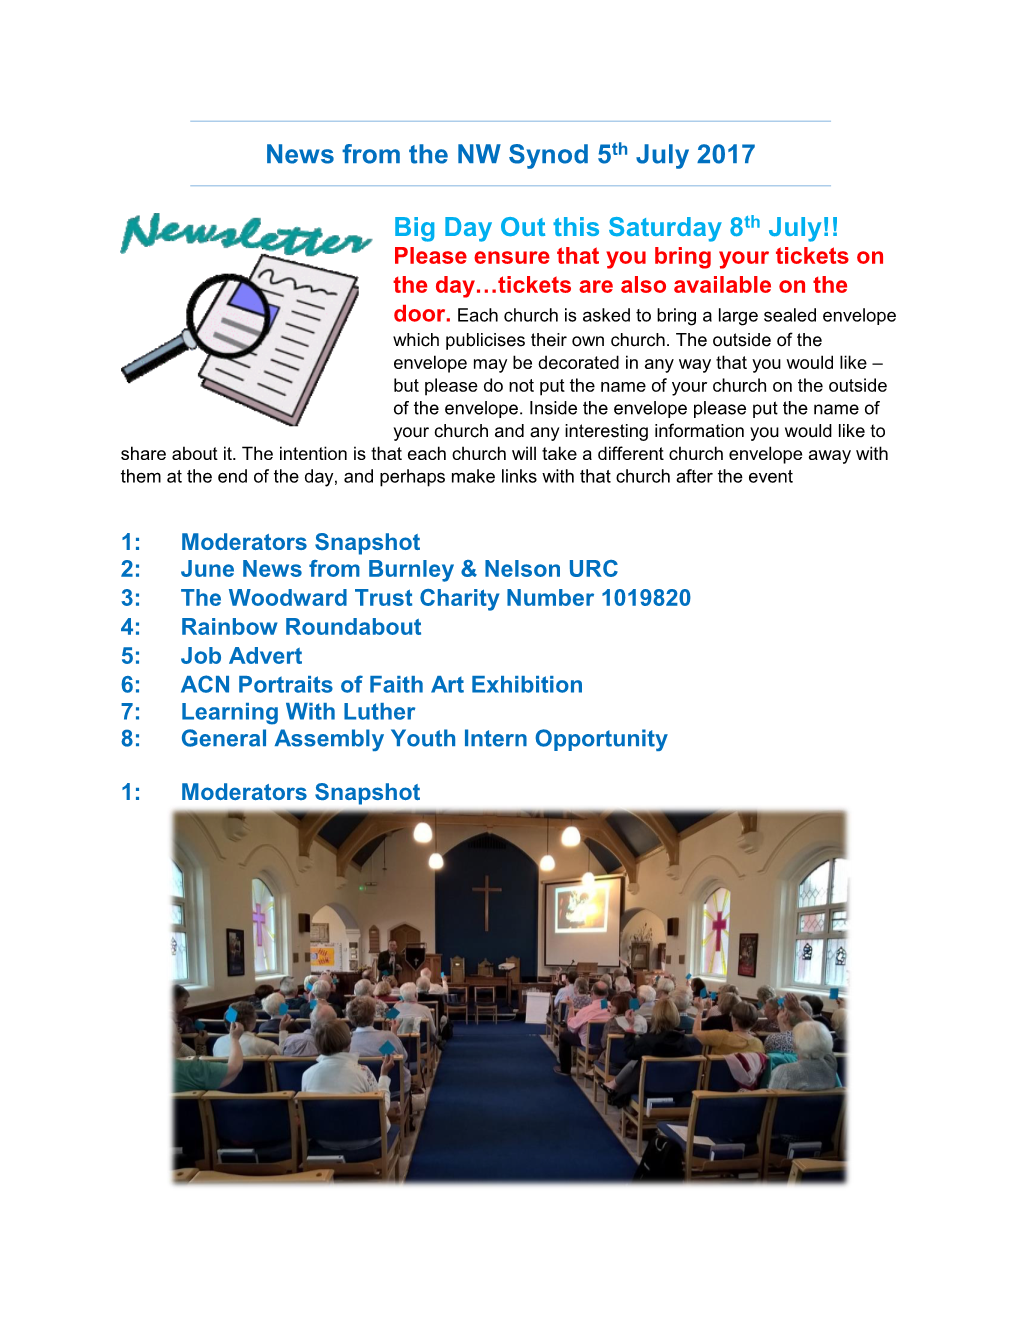 News from the NW Synod 5Th July 2017 Big Day out This Saturday 8Th